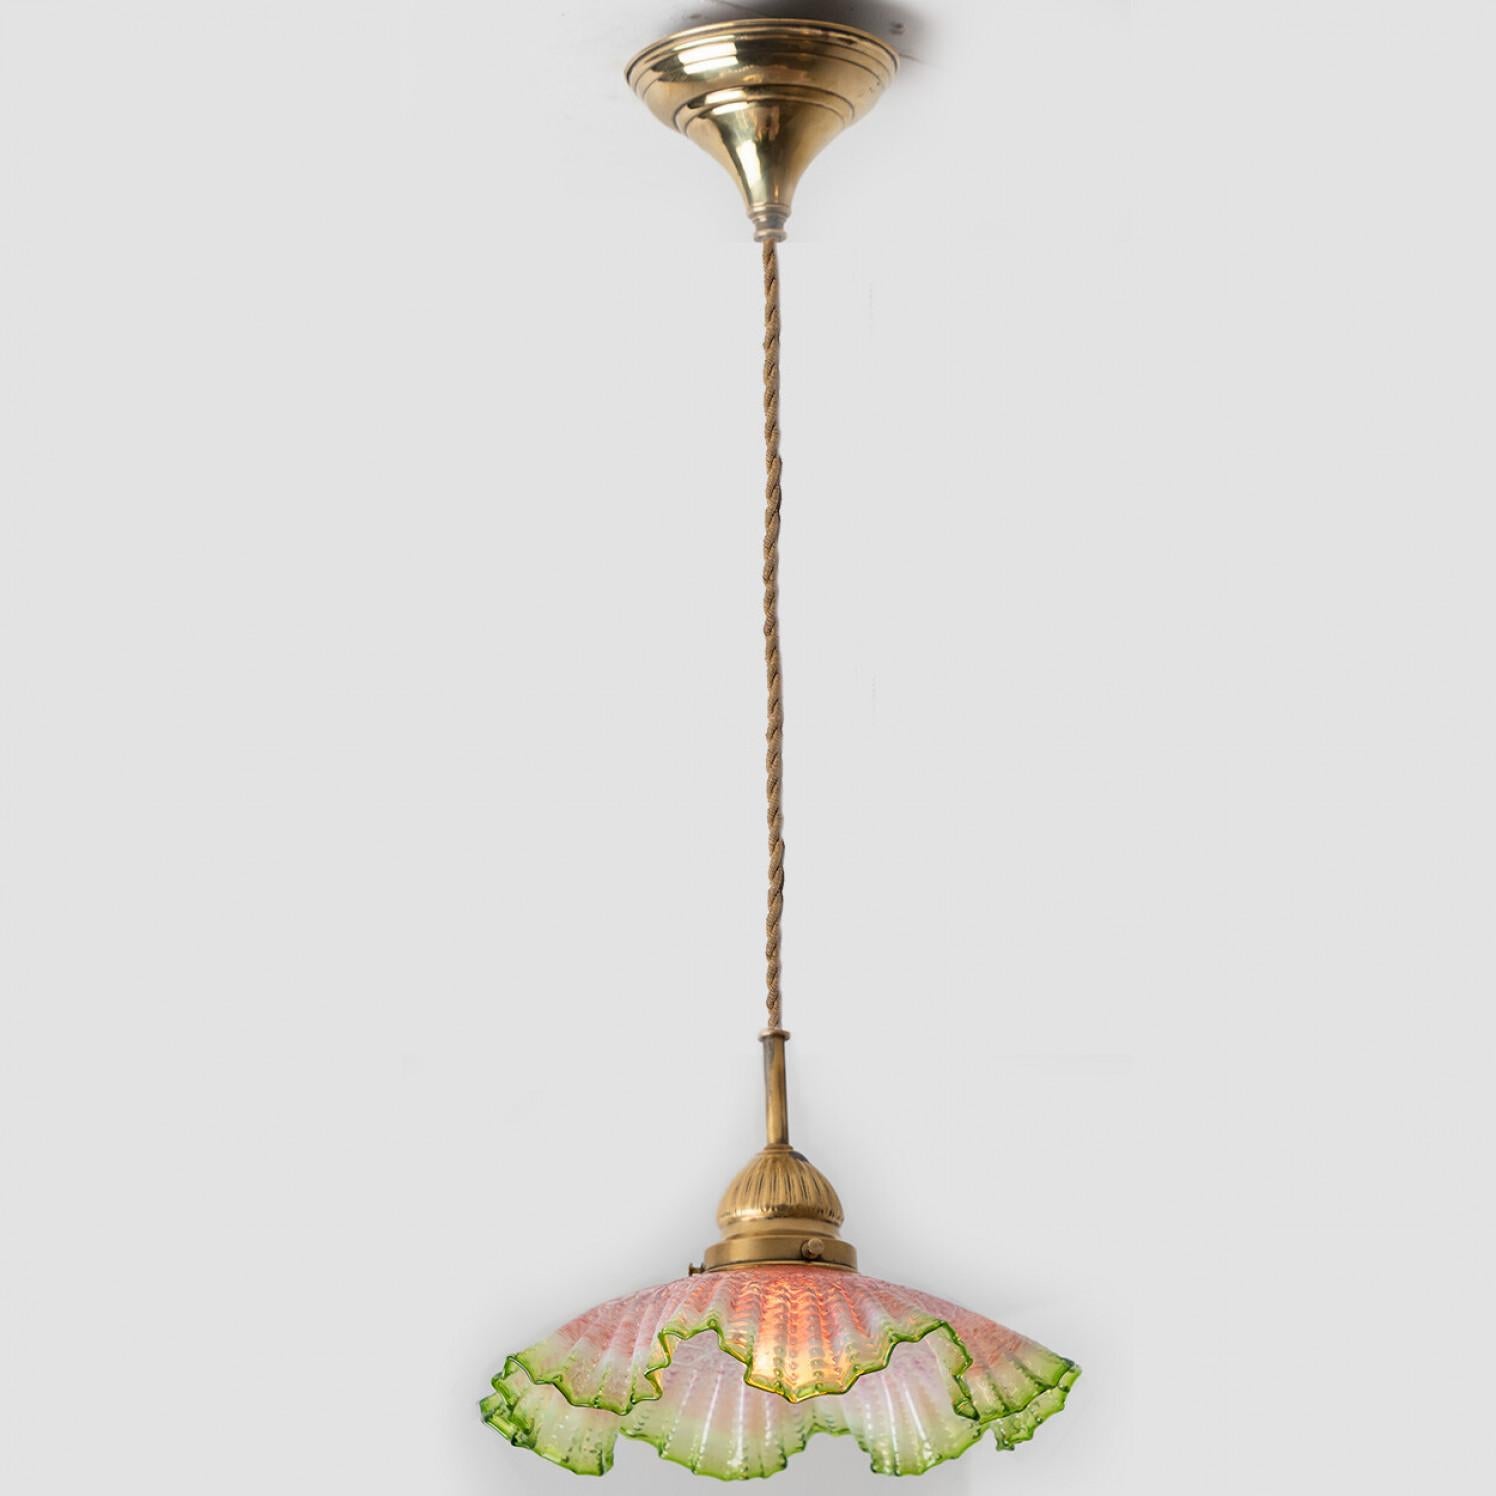 Pair of Art Deco Green Pink Skirt-shaped Glass and Brass Pendant Lights, 1930 For Sale 5